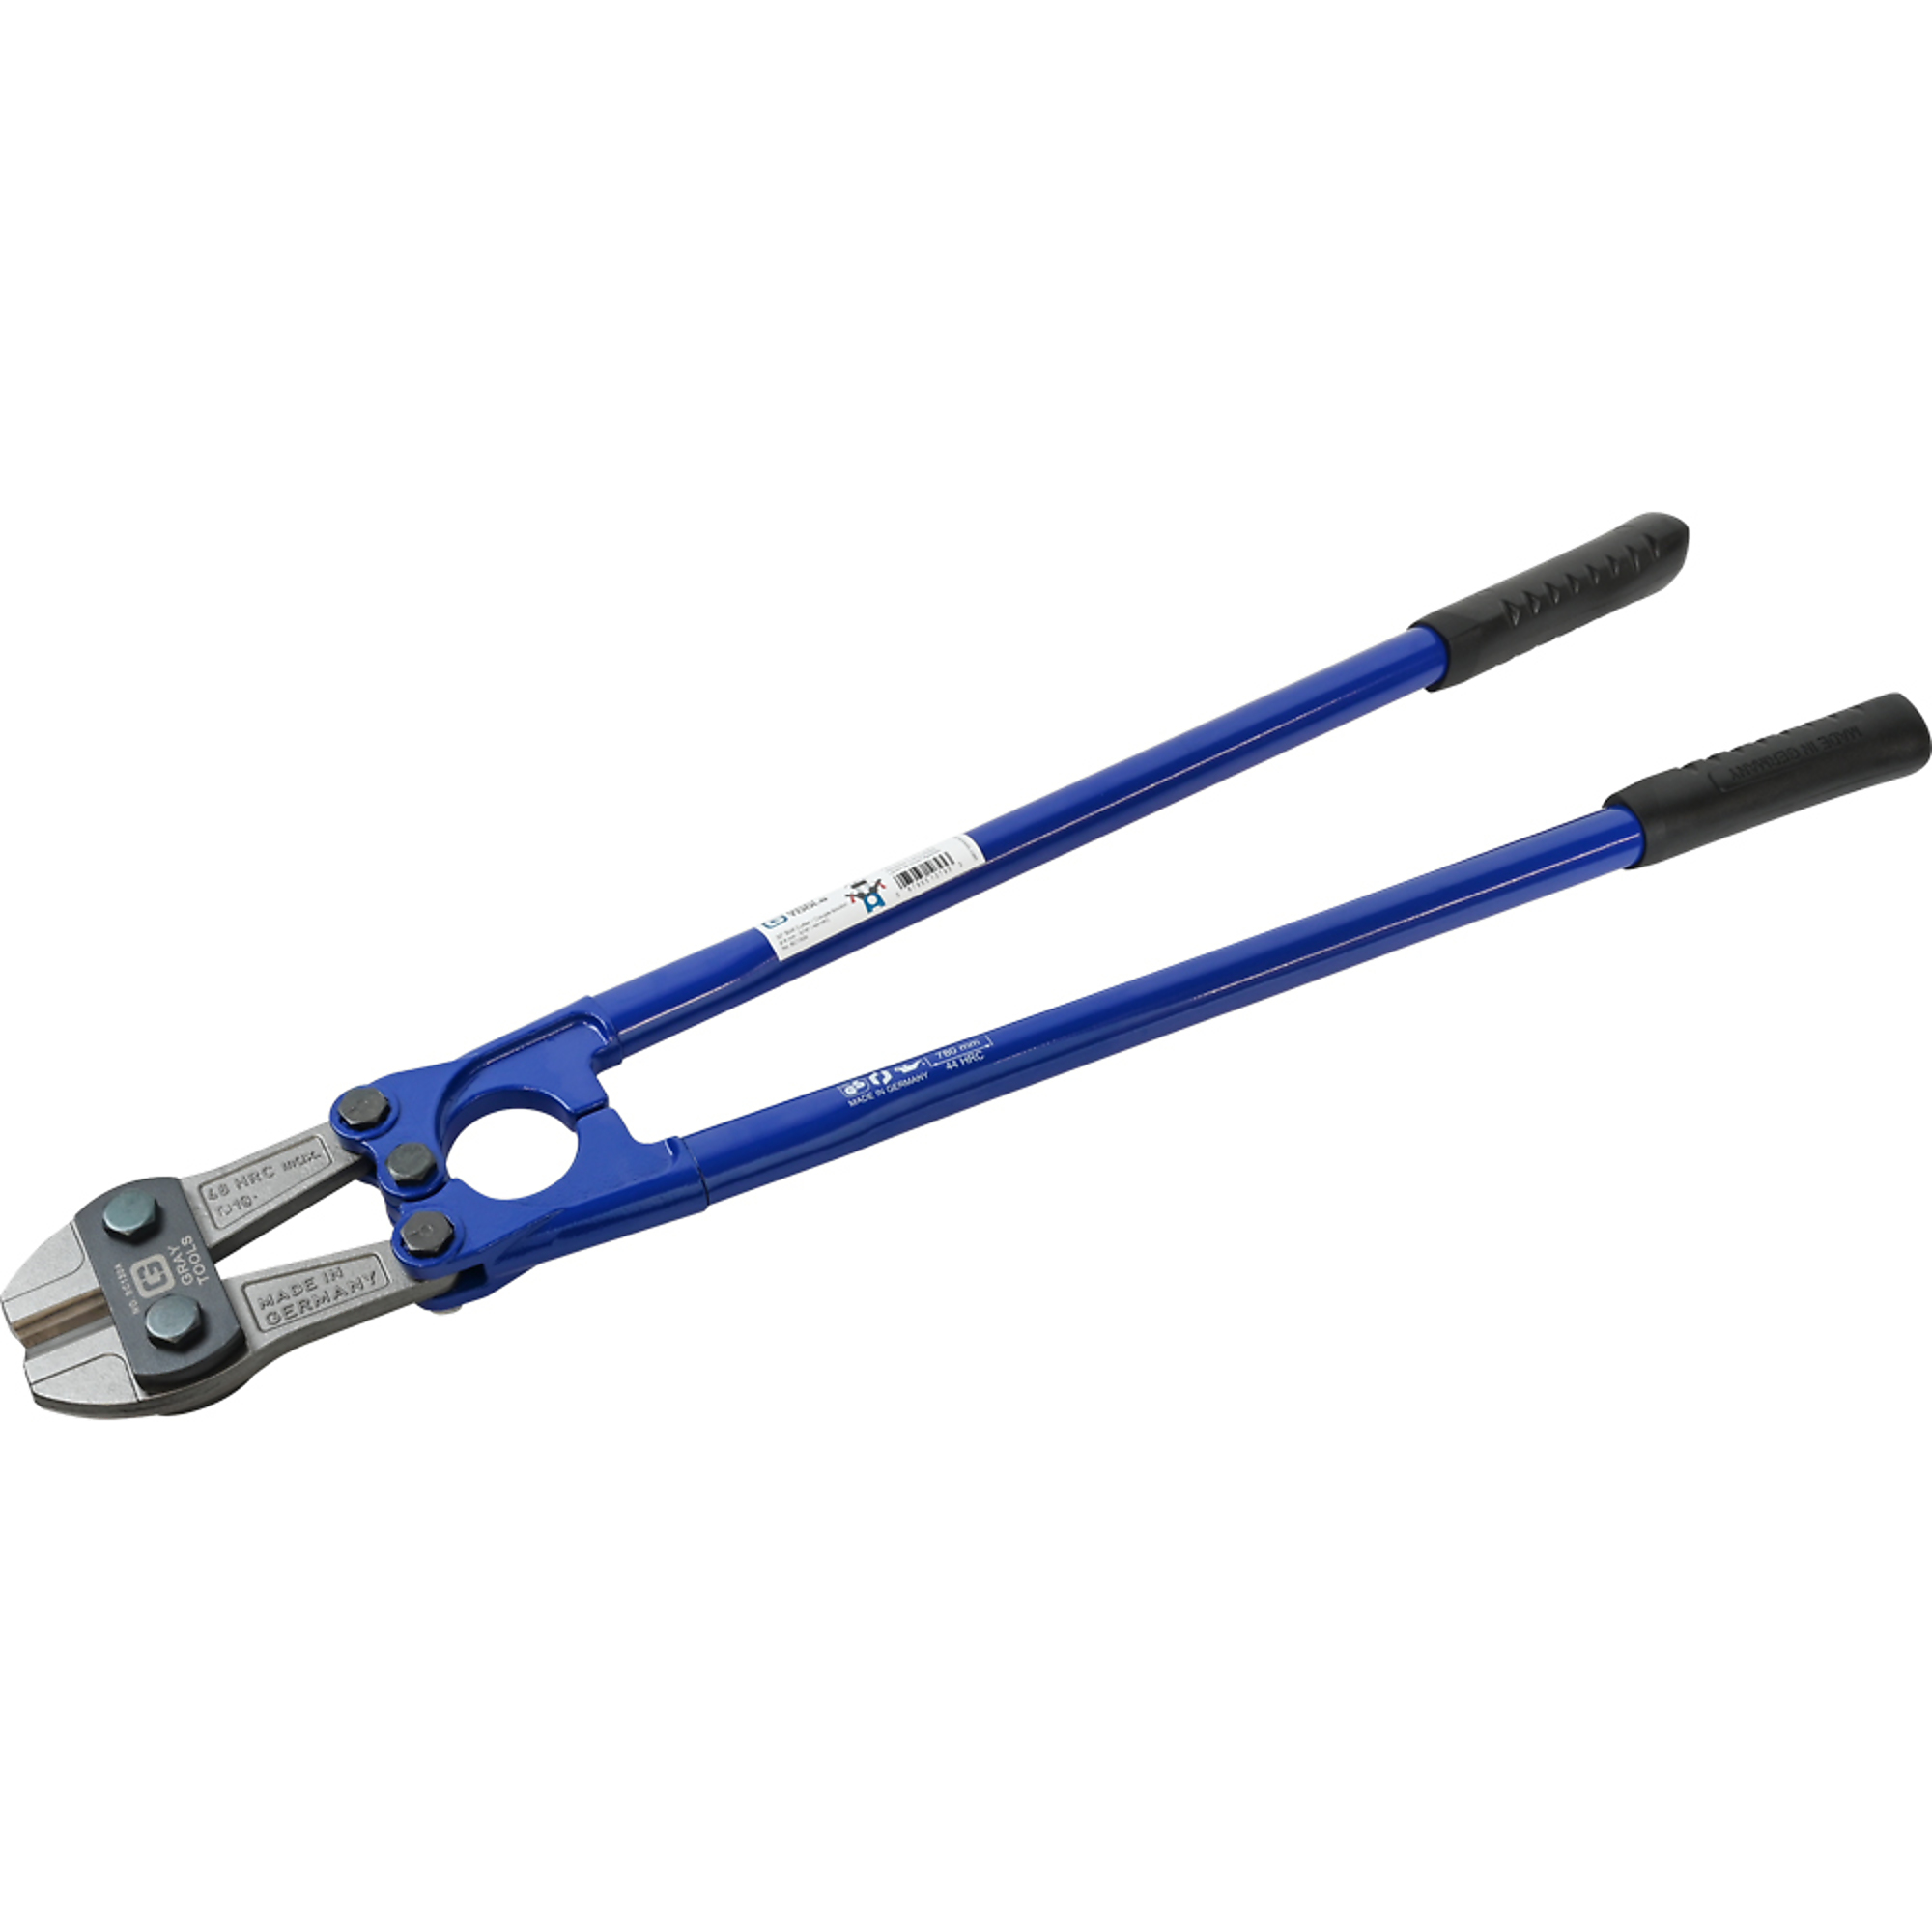 Gray Tools, 30Inch Bolt Cutter, 1/2Inch Capacity, Tool Length 30 in, Jaw Opening 0.75 in, Model BC130A